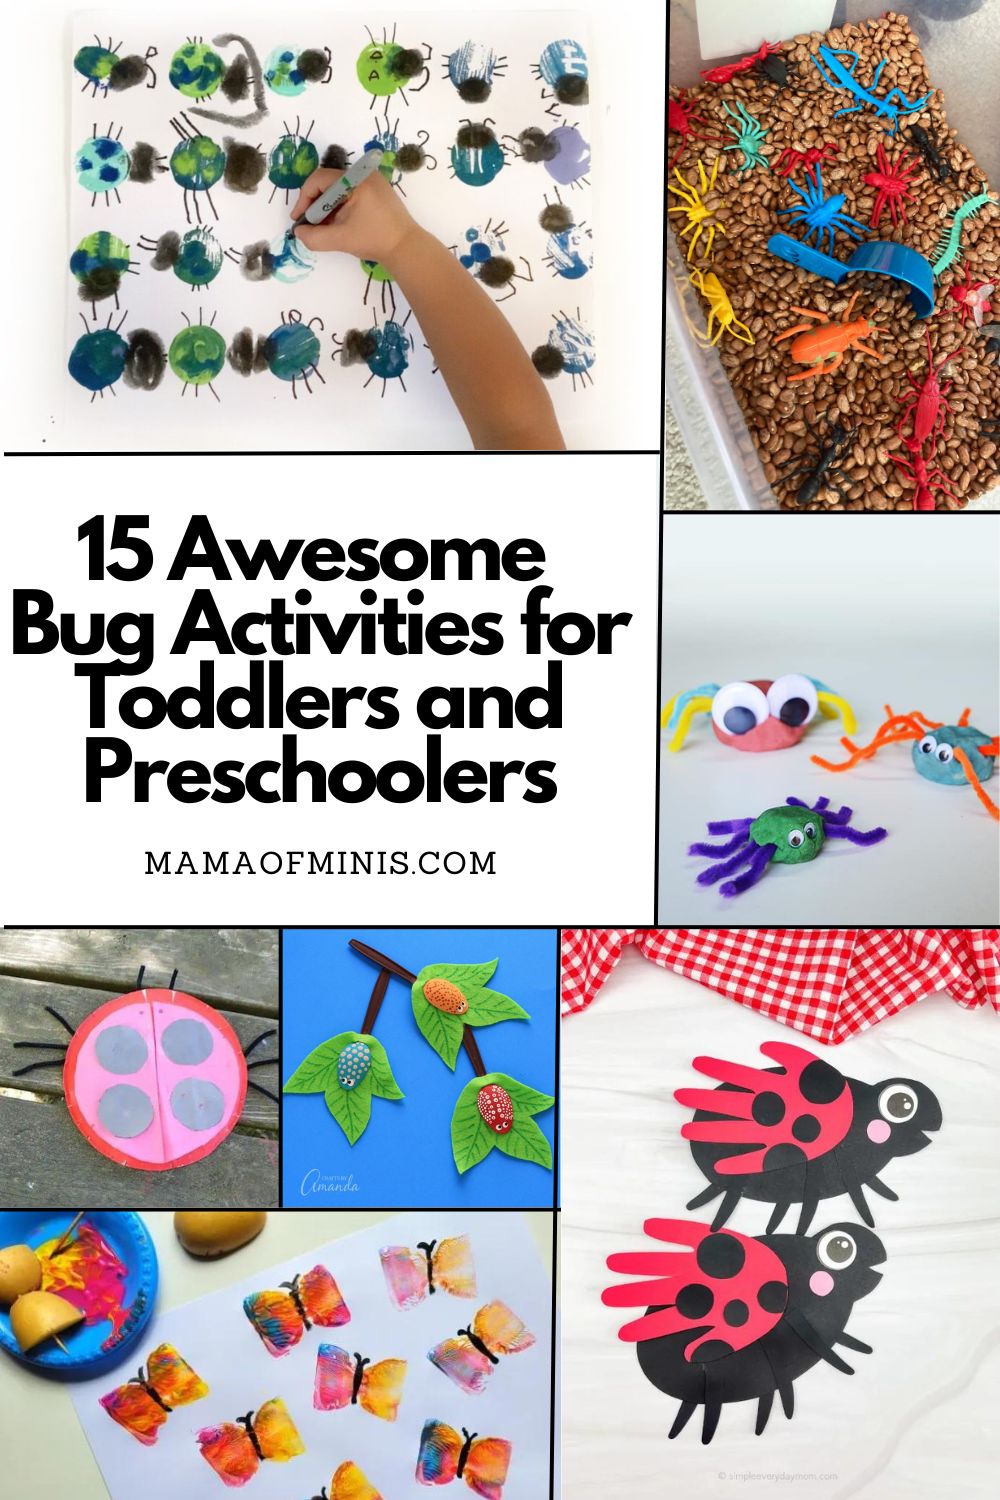 15 Fun Bug Activities for Toddlers and Preschoolers